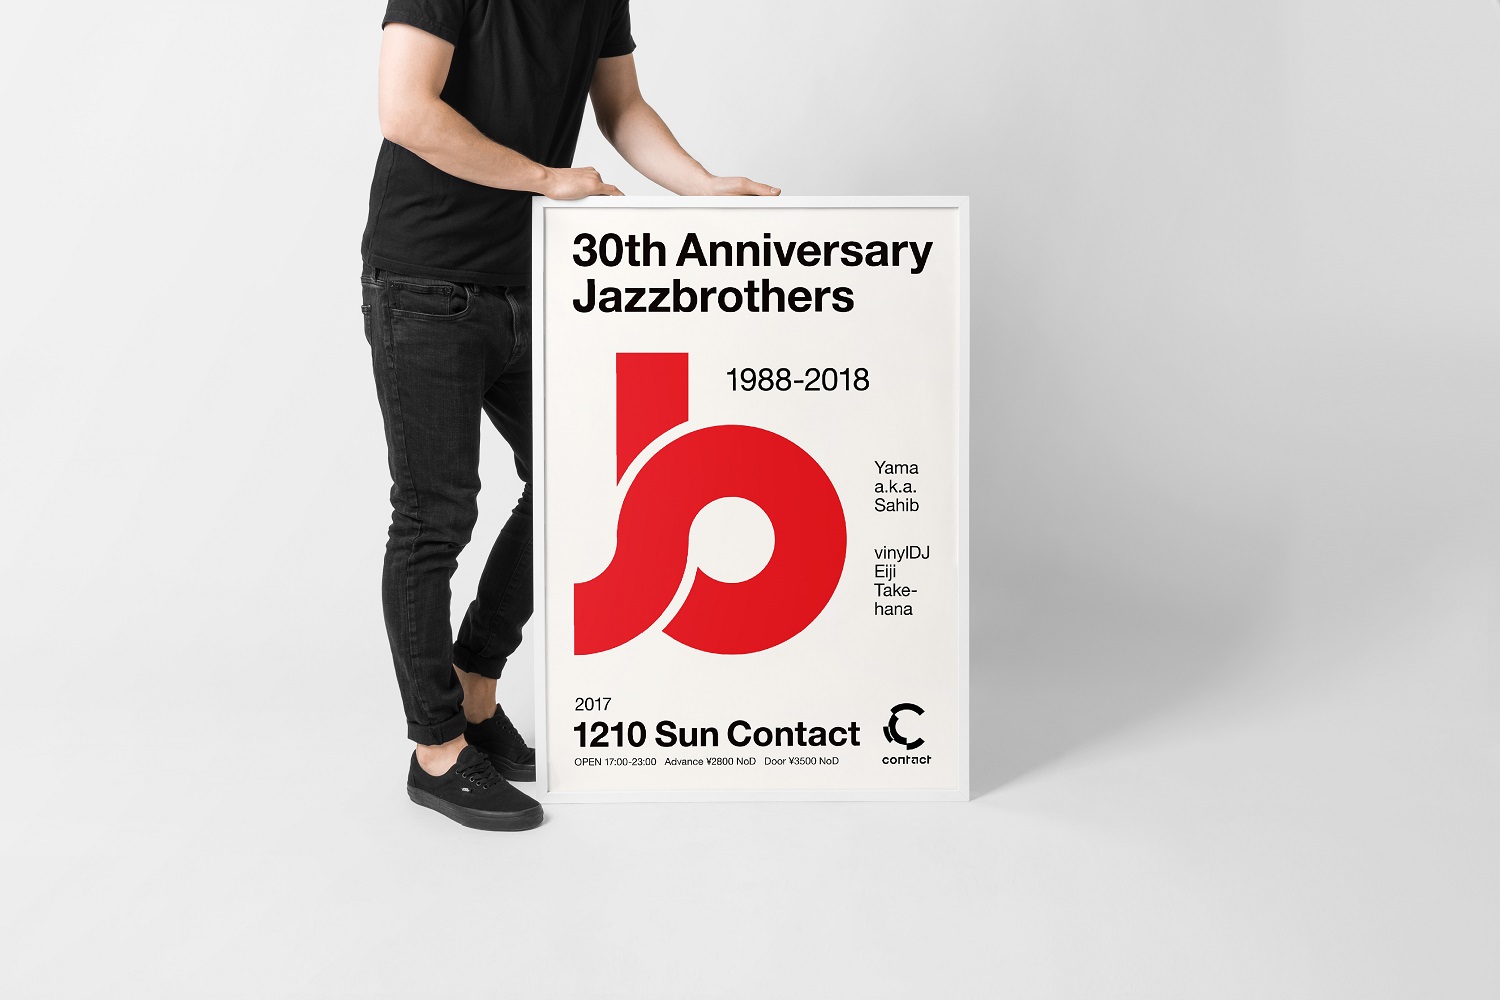 Jazzbrothers 30th Anniversary